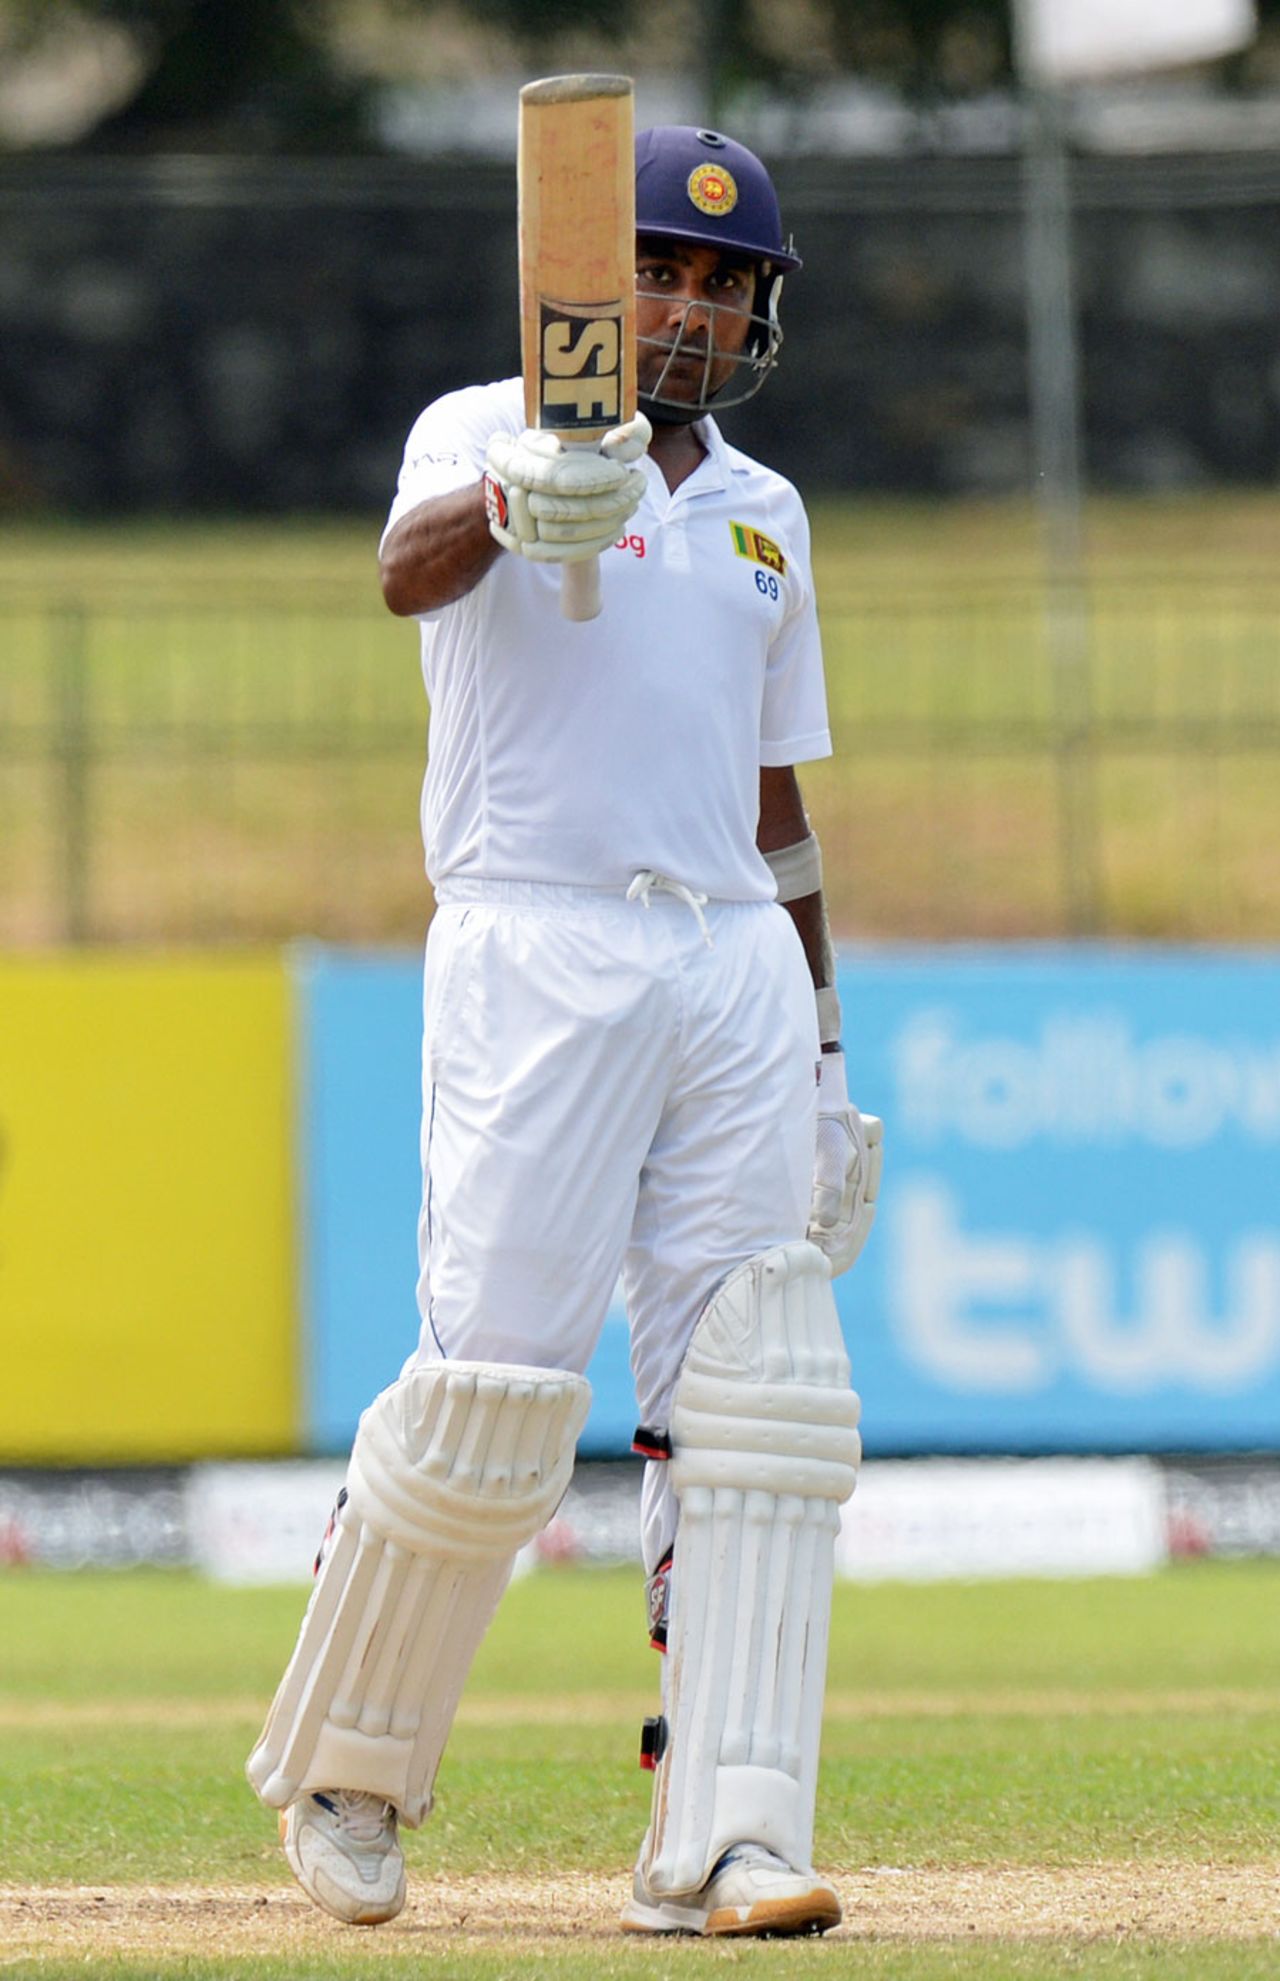 Mahela Jayawardene acknowledges the applause after reaching 150, Sri Lanka v South Africa, 2nd Test, Colombo, 2nd day, July 25, 2014